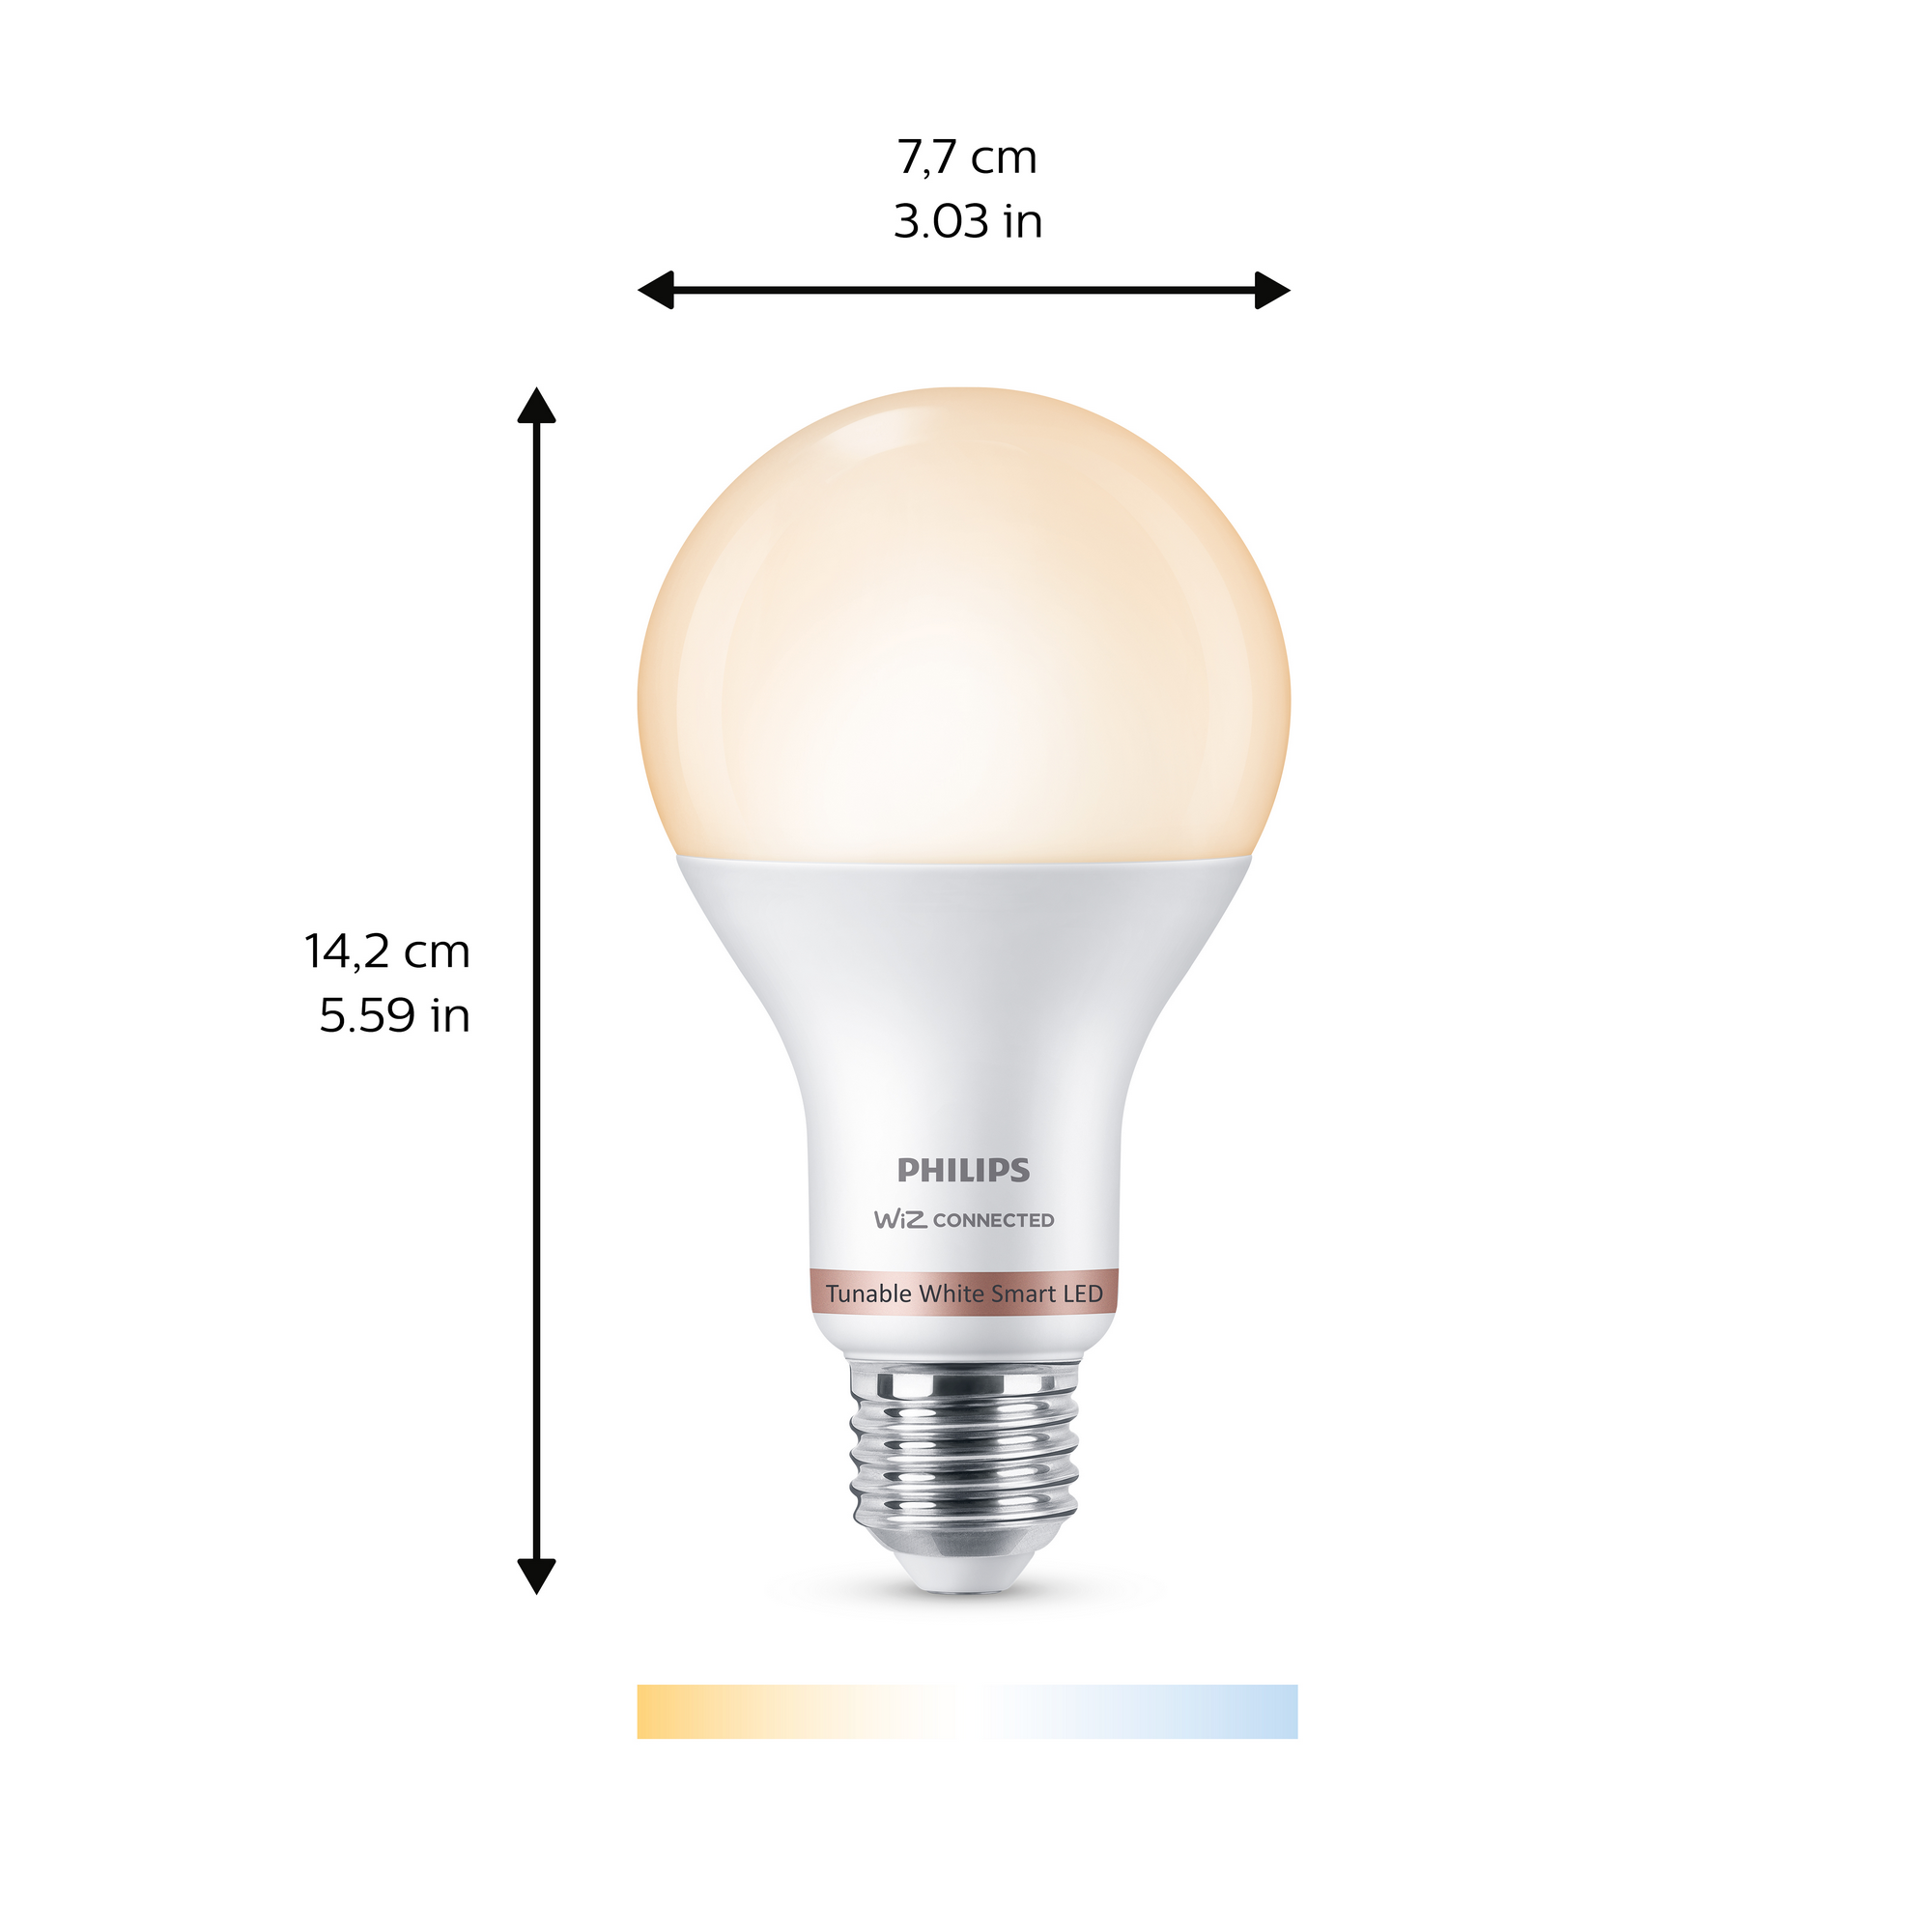 LED-Lampe 'SmartLED' 1521 lm E27 Glühlampe weiß 2700-6500 K + product picture